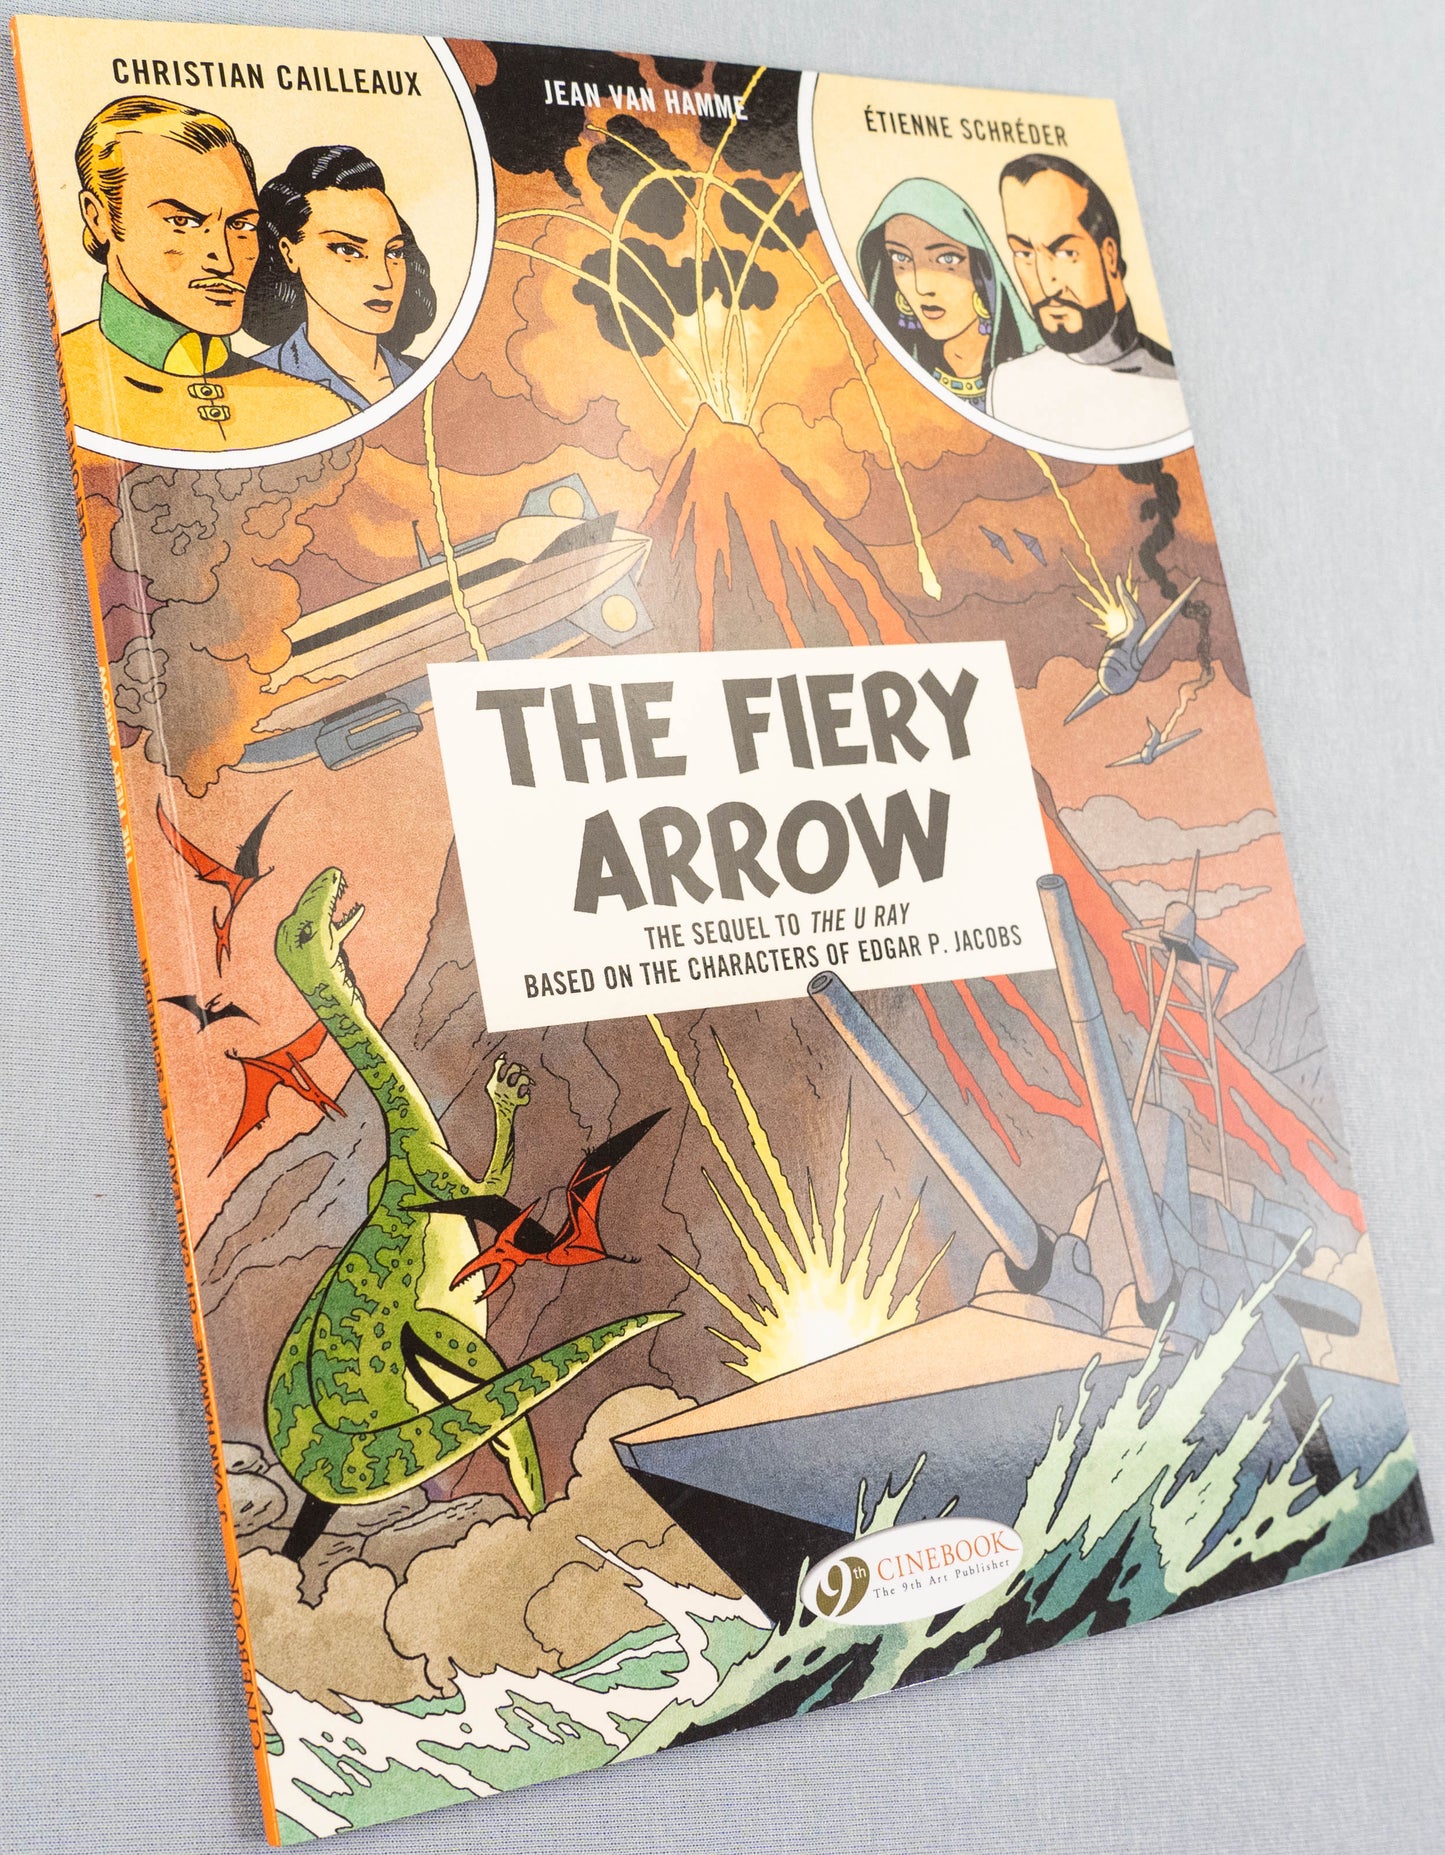 Before Blake & Mortimer Volume 2: The Fiery Arrow - Cinebook UK Paperback Edition Comic